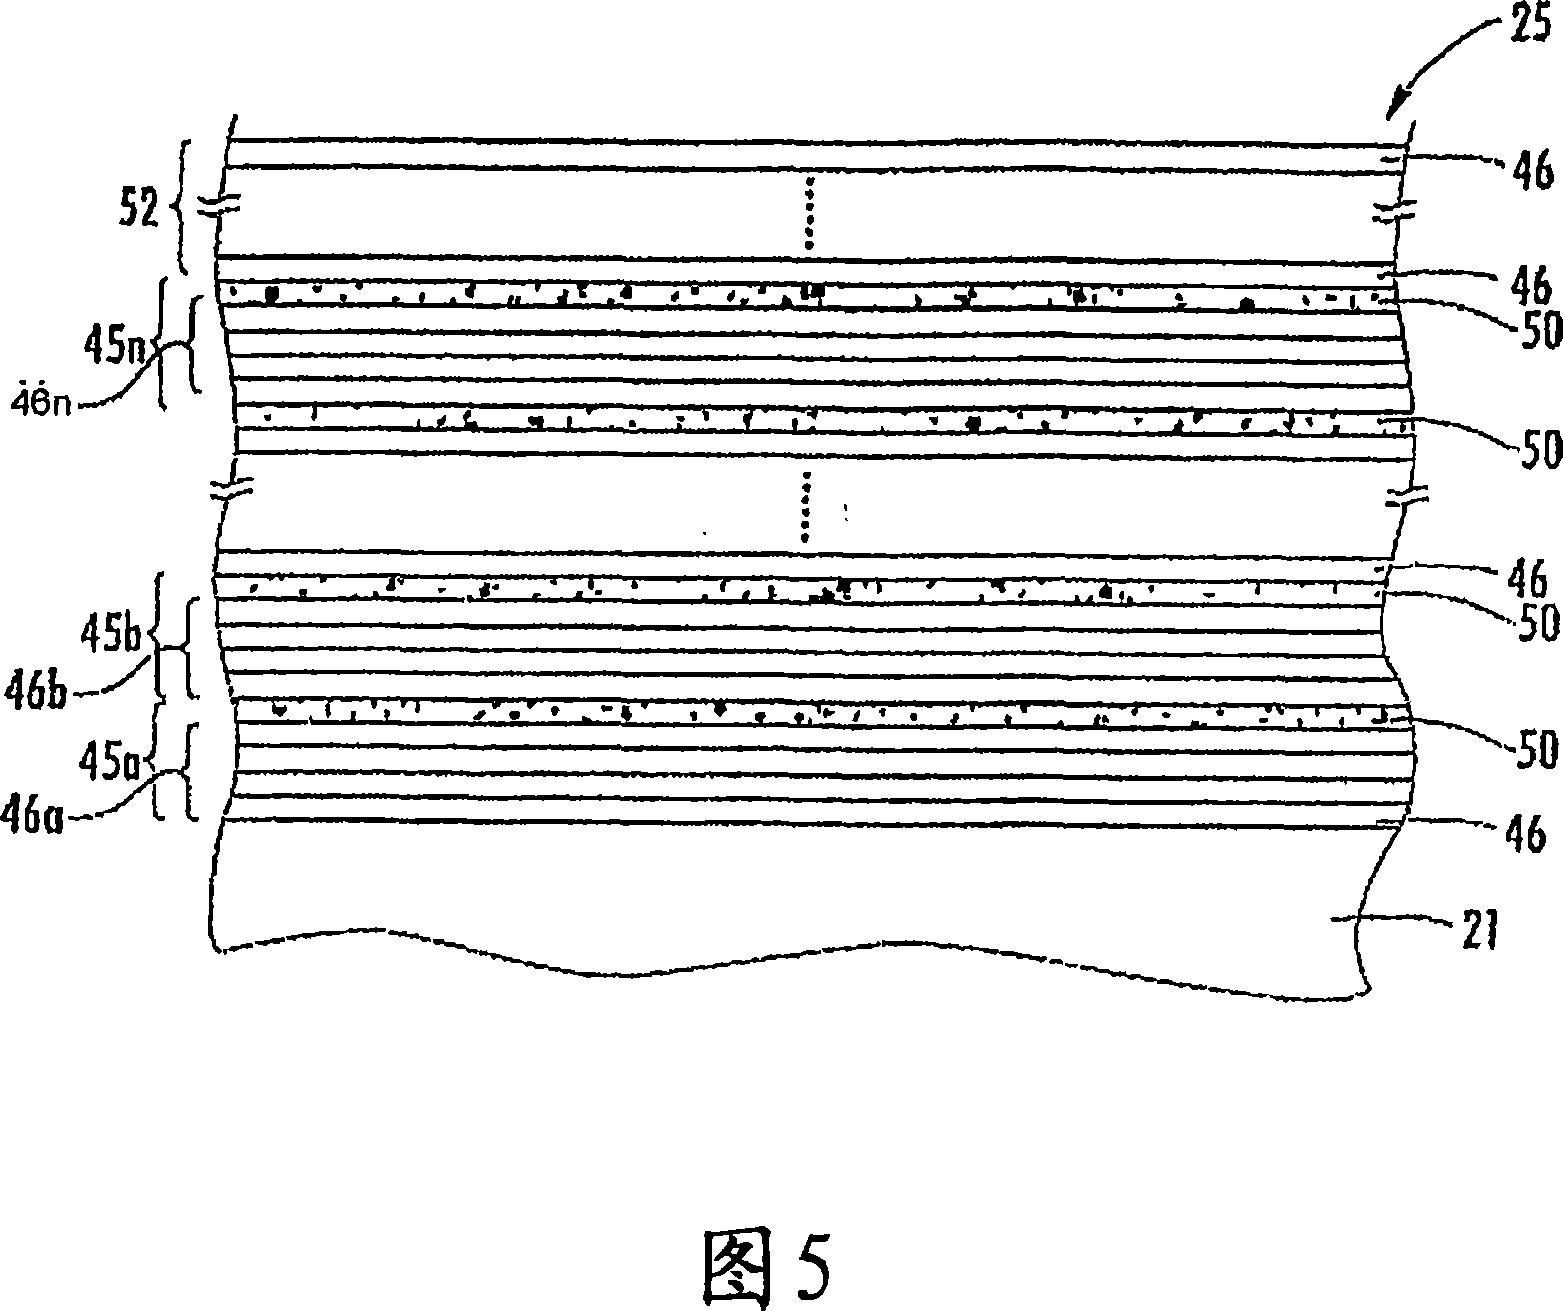 Semiconductor device including a superlattice and adjacent semiconductor layer with doped regions defining a semiconductor junction